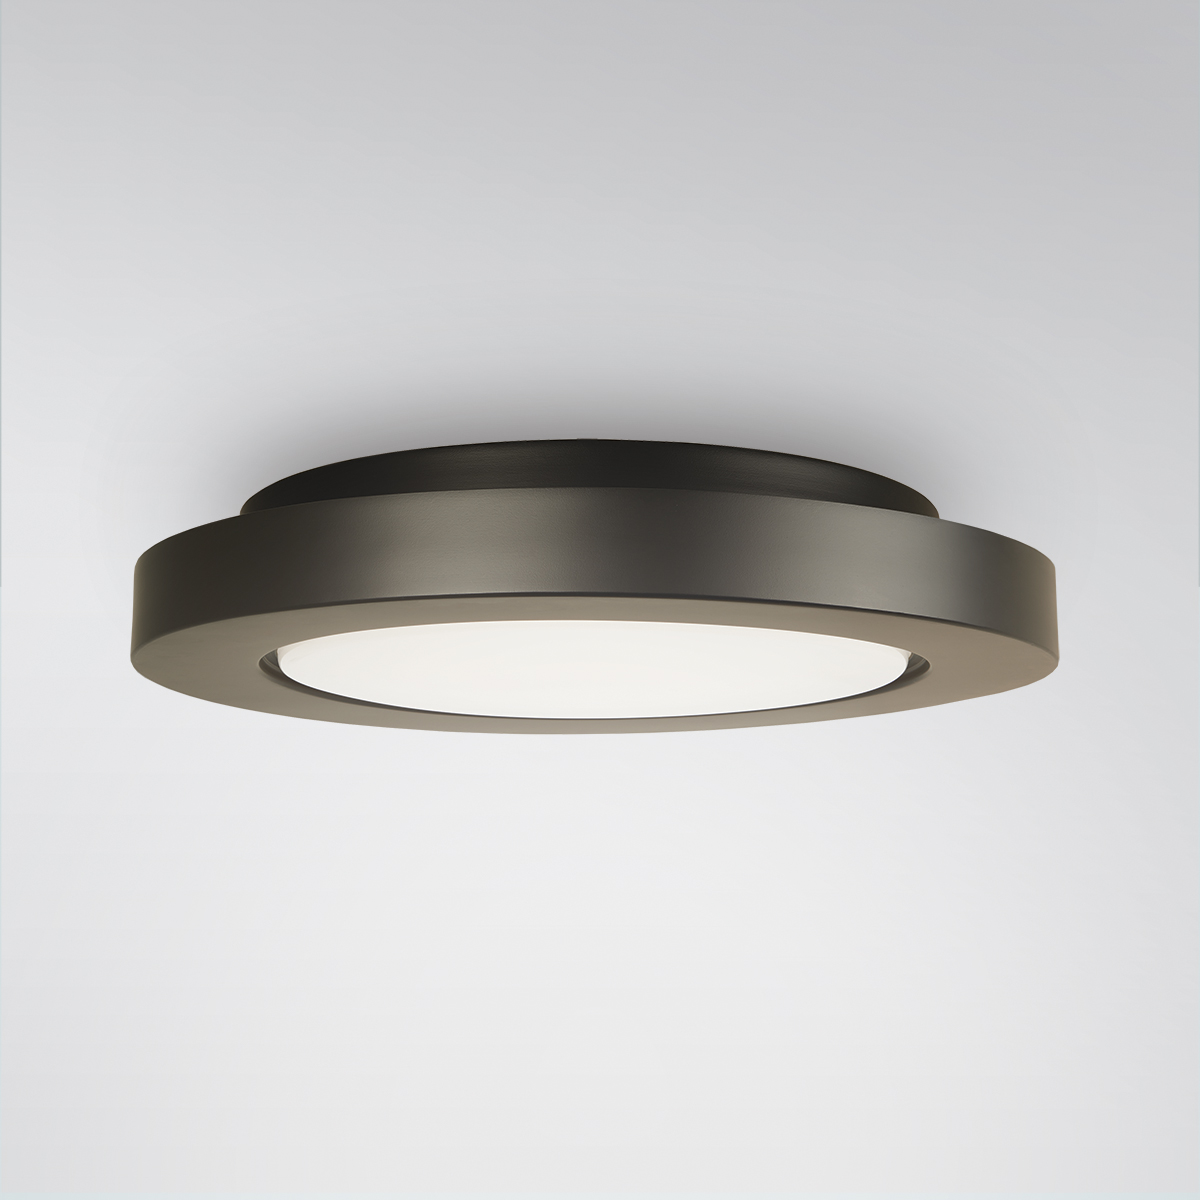 A circular ceiling-mounted luminaire with a dark painted finish and a luminous downlight